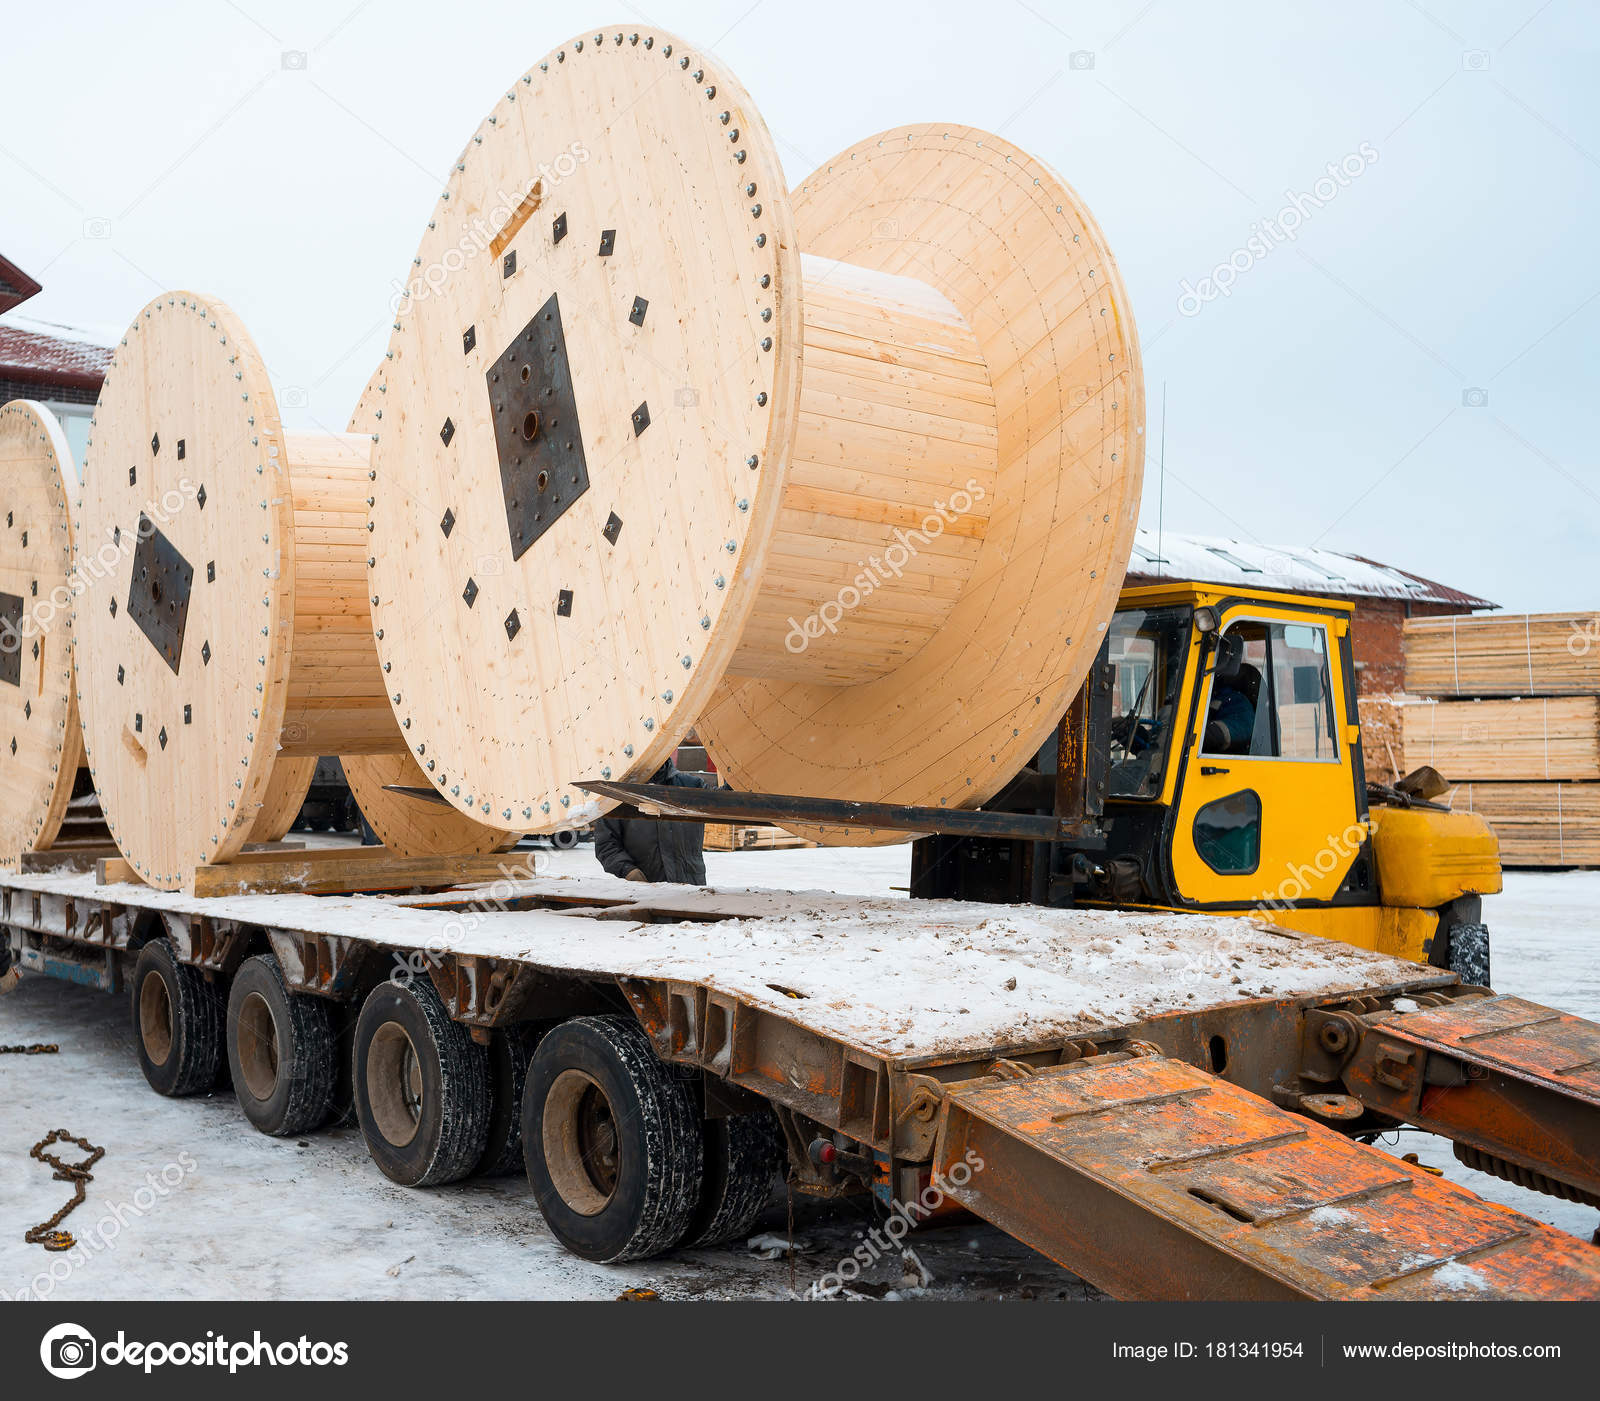 Loading cable coil — Stock Photo © format35 #181341954